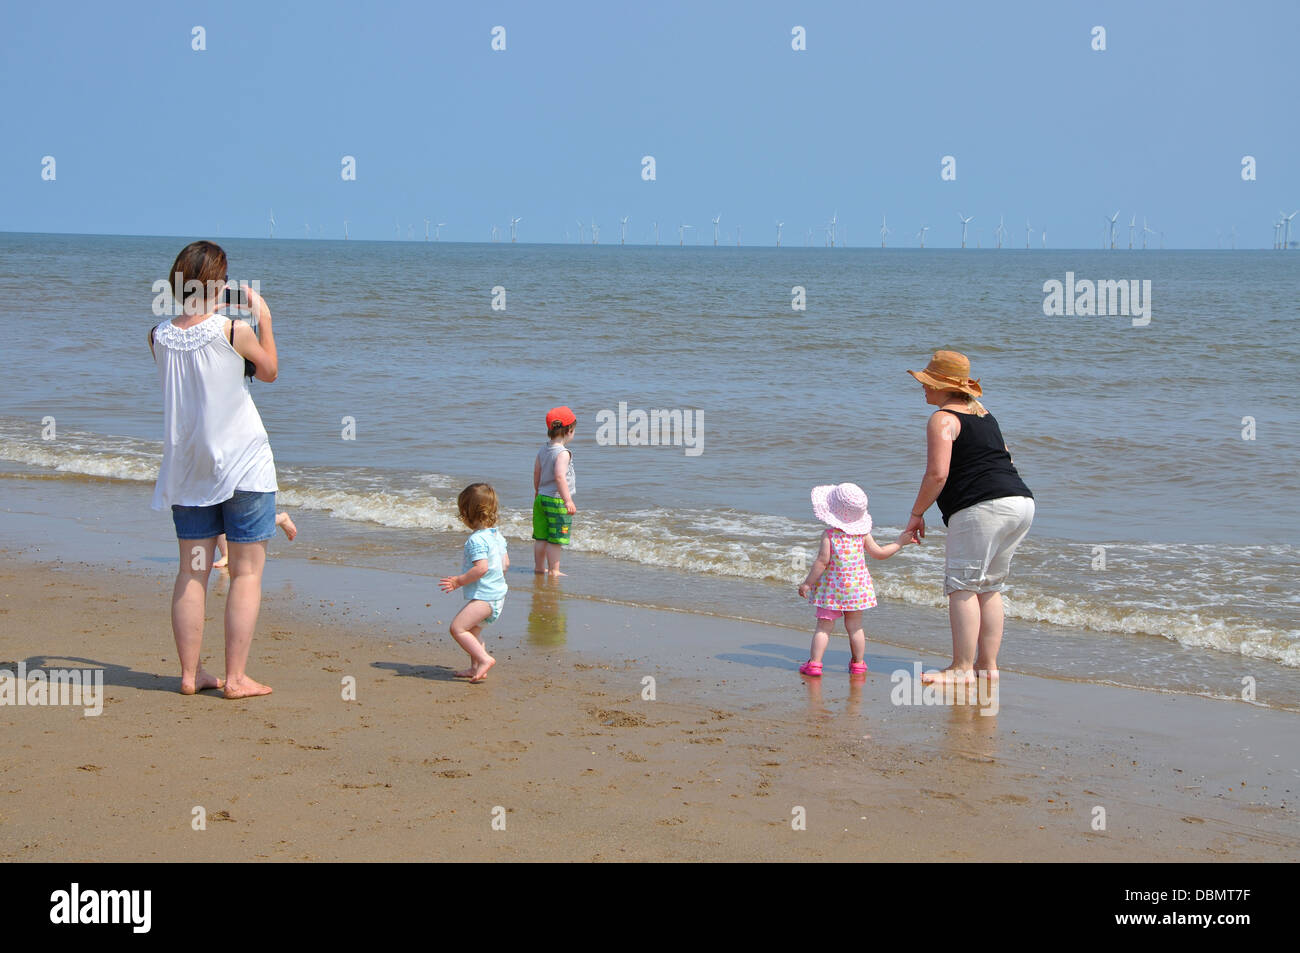 woman taking photo of family on beach, Skegness, Lincolnshire, England, UK Stock Photo